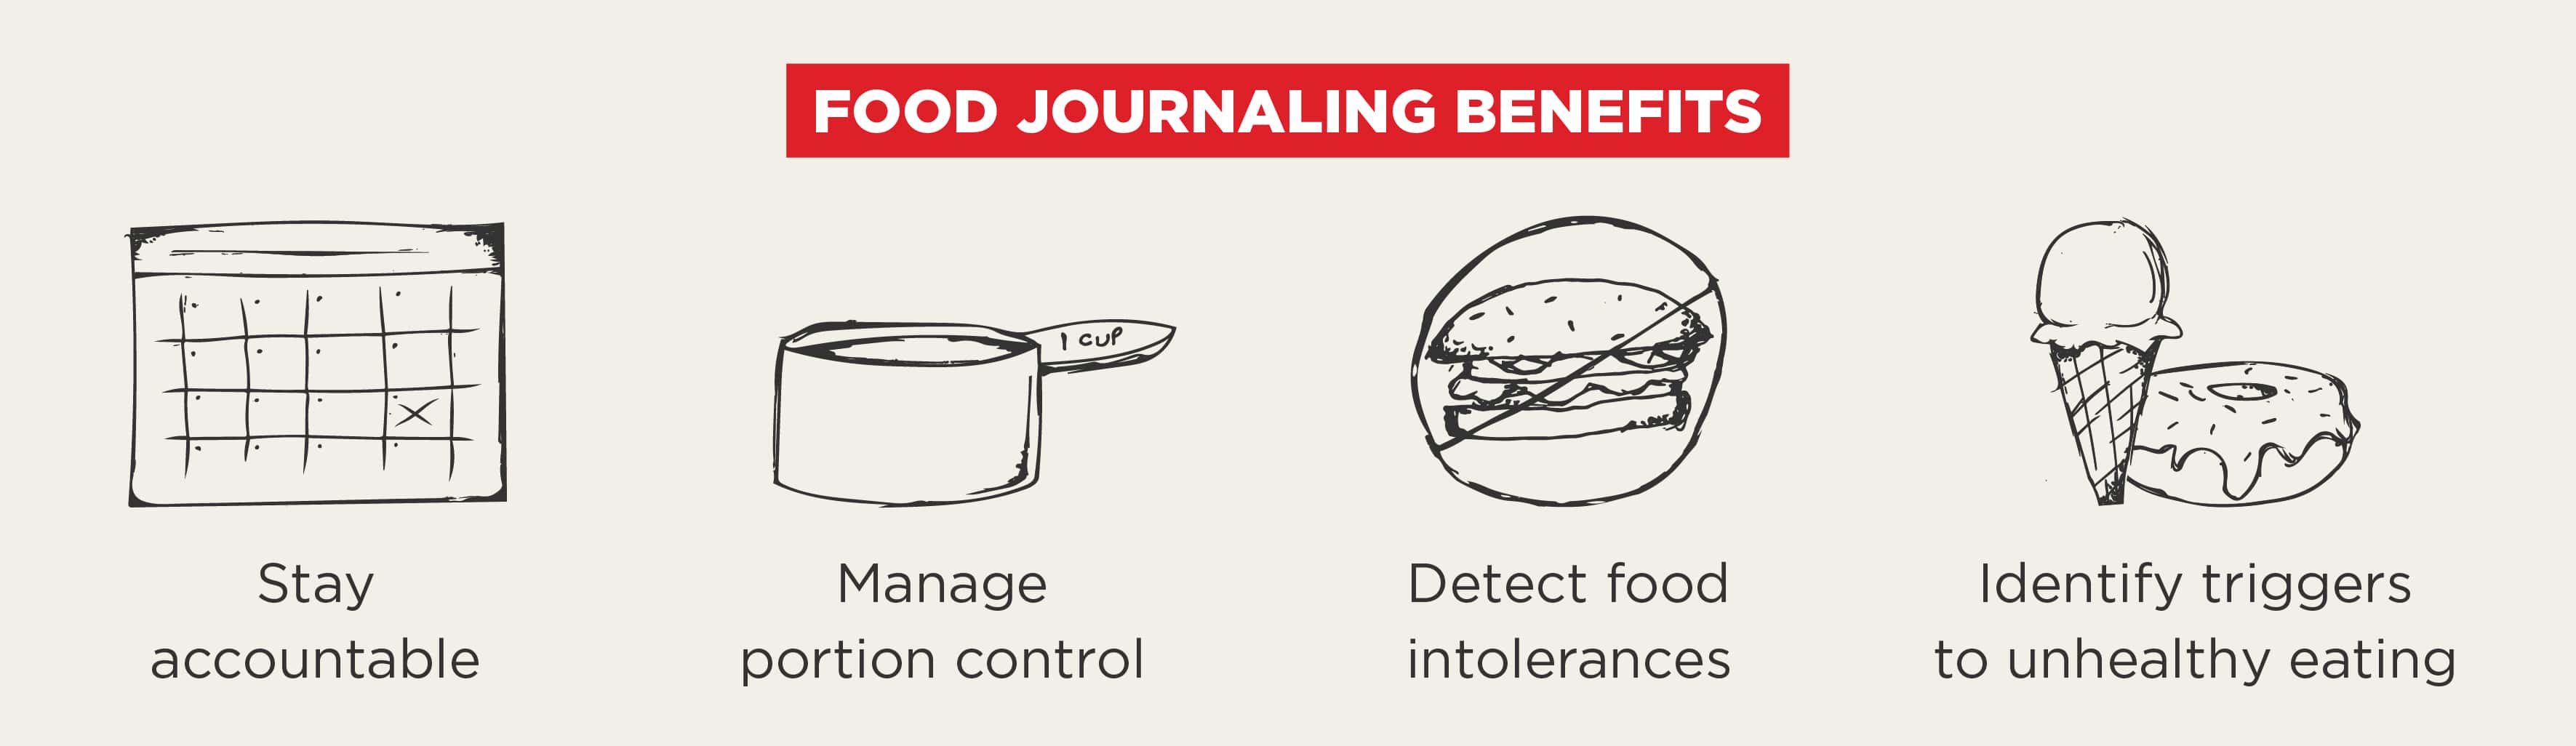 Benefits: Food journaling helps you stay accountable, manage portion control, detect food intolerances, and identify triggers to unhealthy eating.